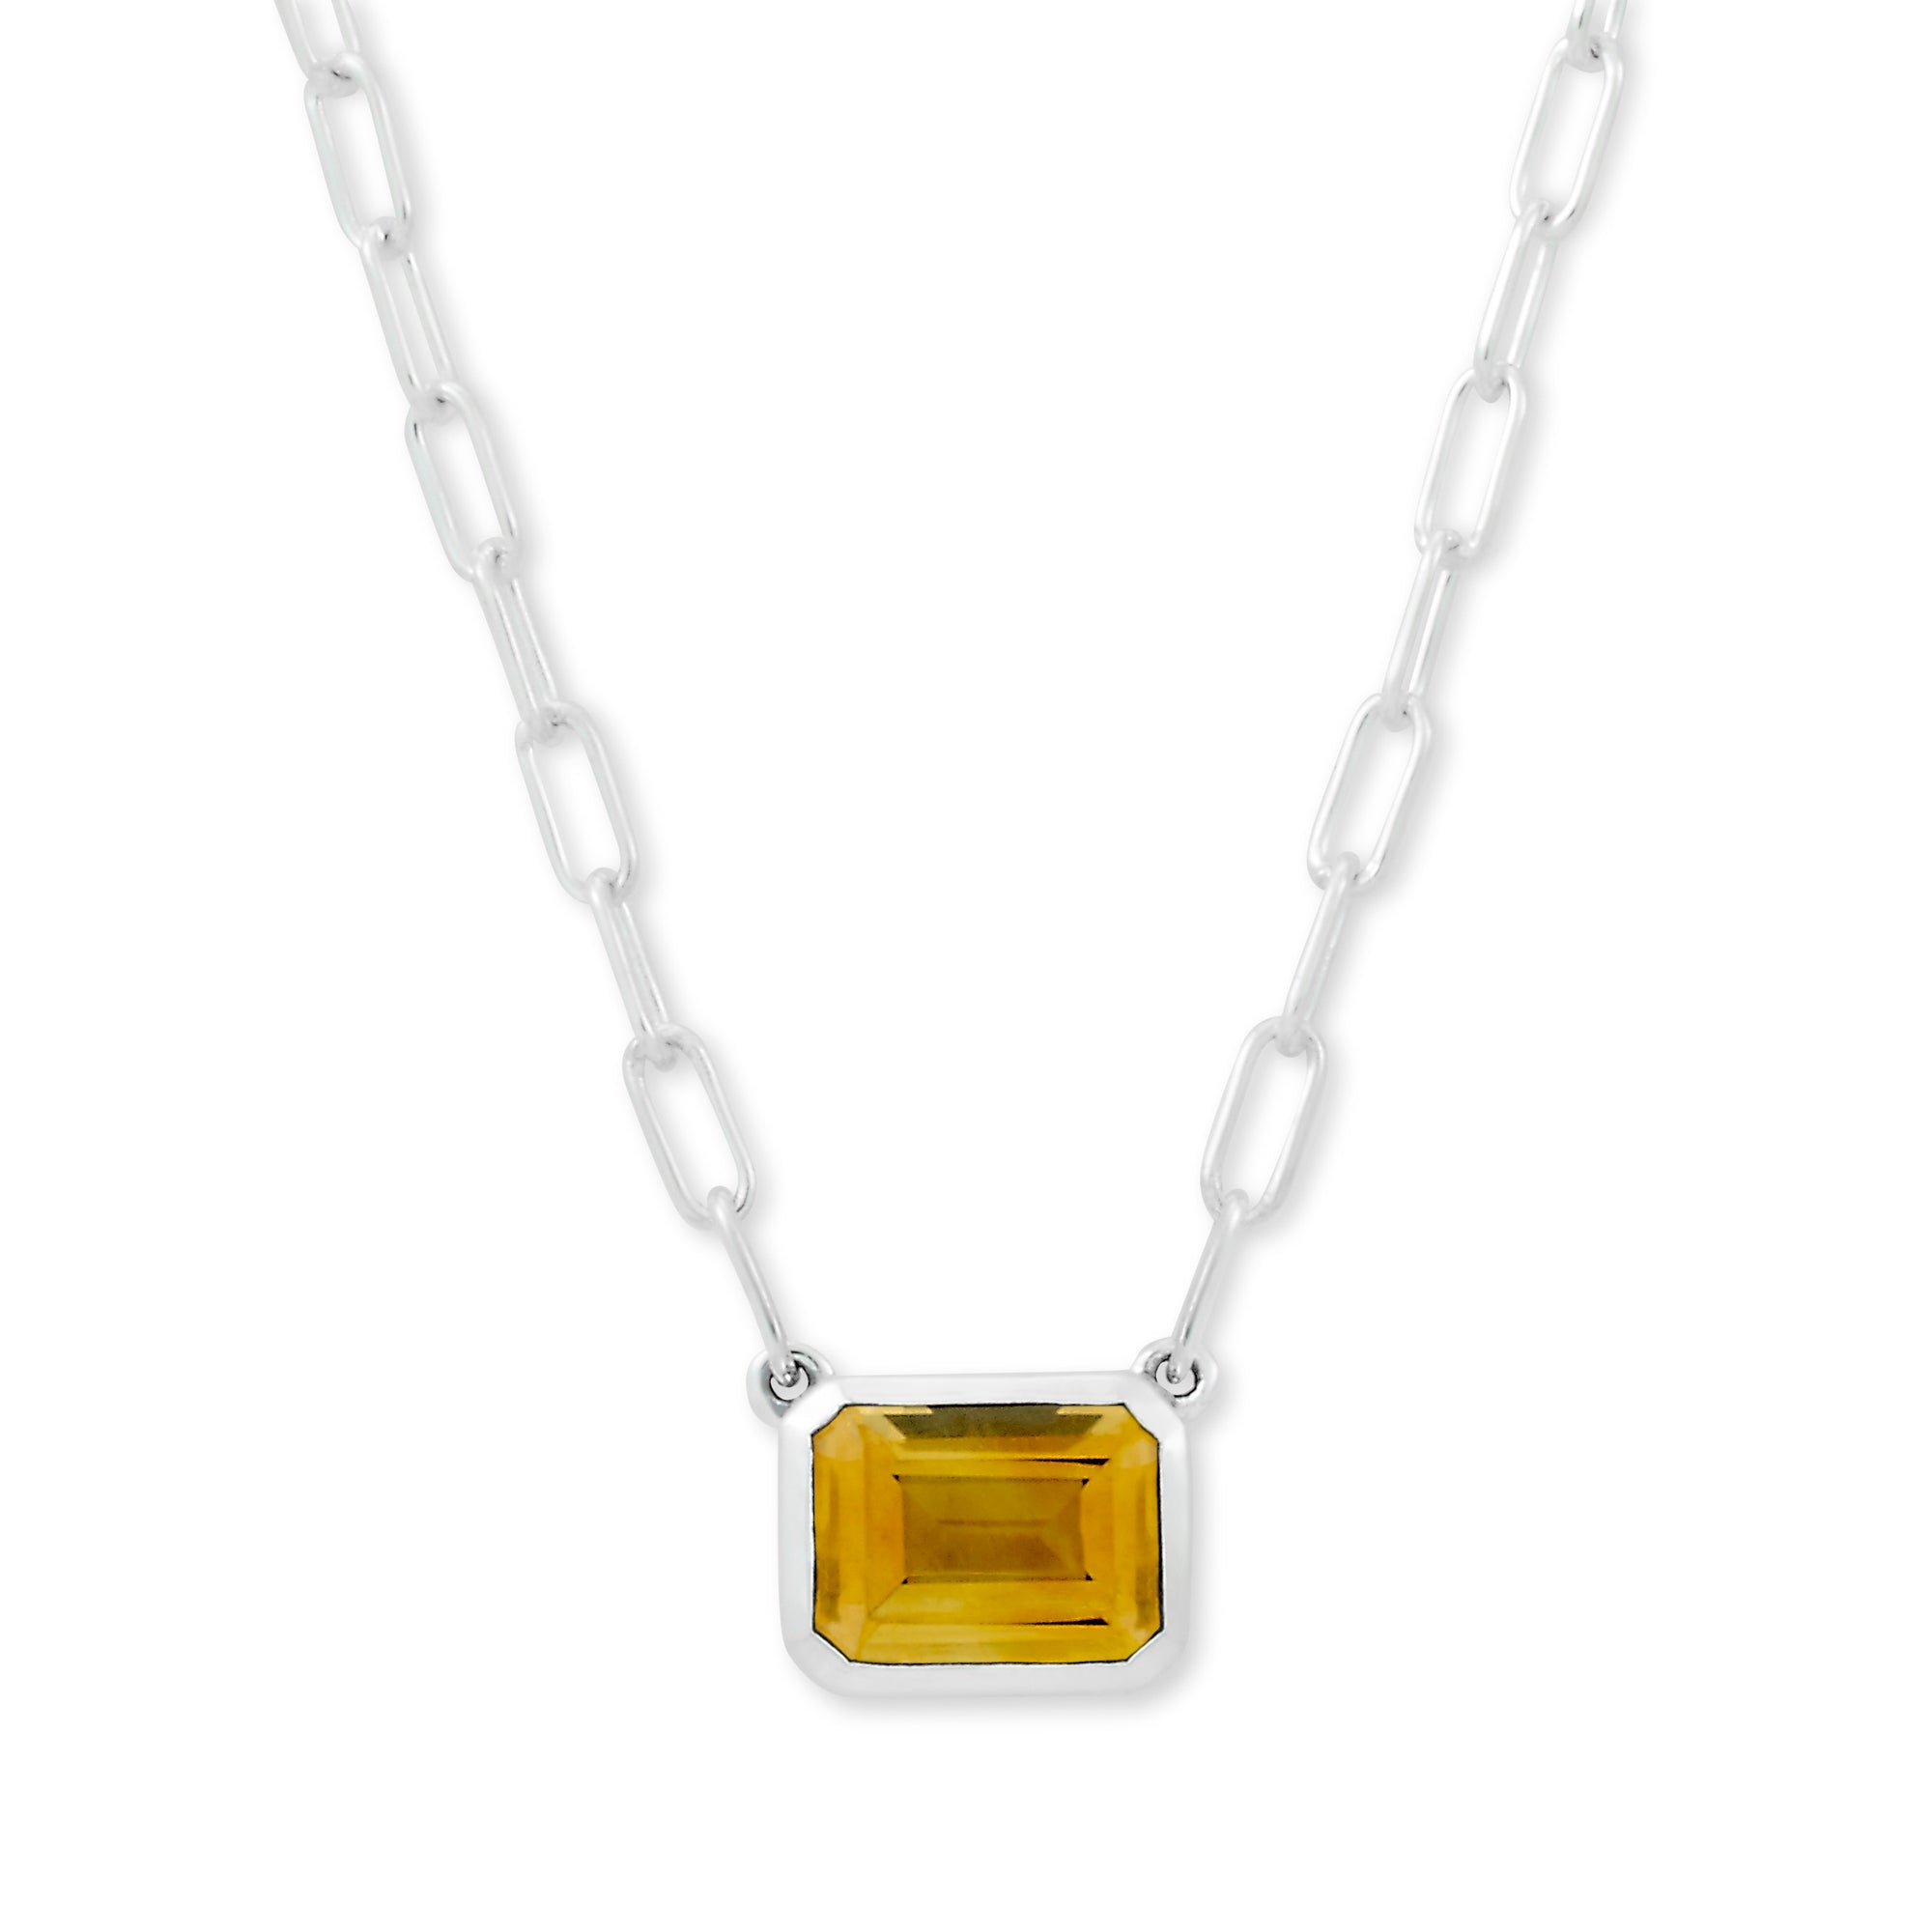 Citrine Eirini Necklace available at Talisman Collection Fine Jewelers in El Dorado Hills, CA and online. Specs: Citrine Eirini Necklace features an emerald-cut citrine solitaire measuring 7x9mm, and is set in Sterling Silver. 